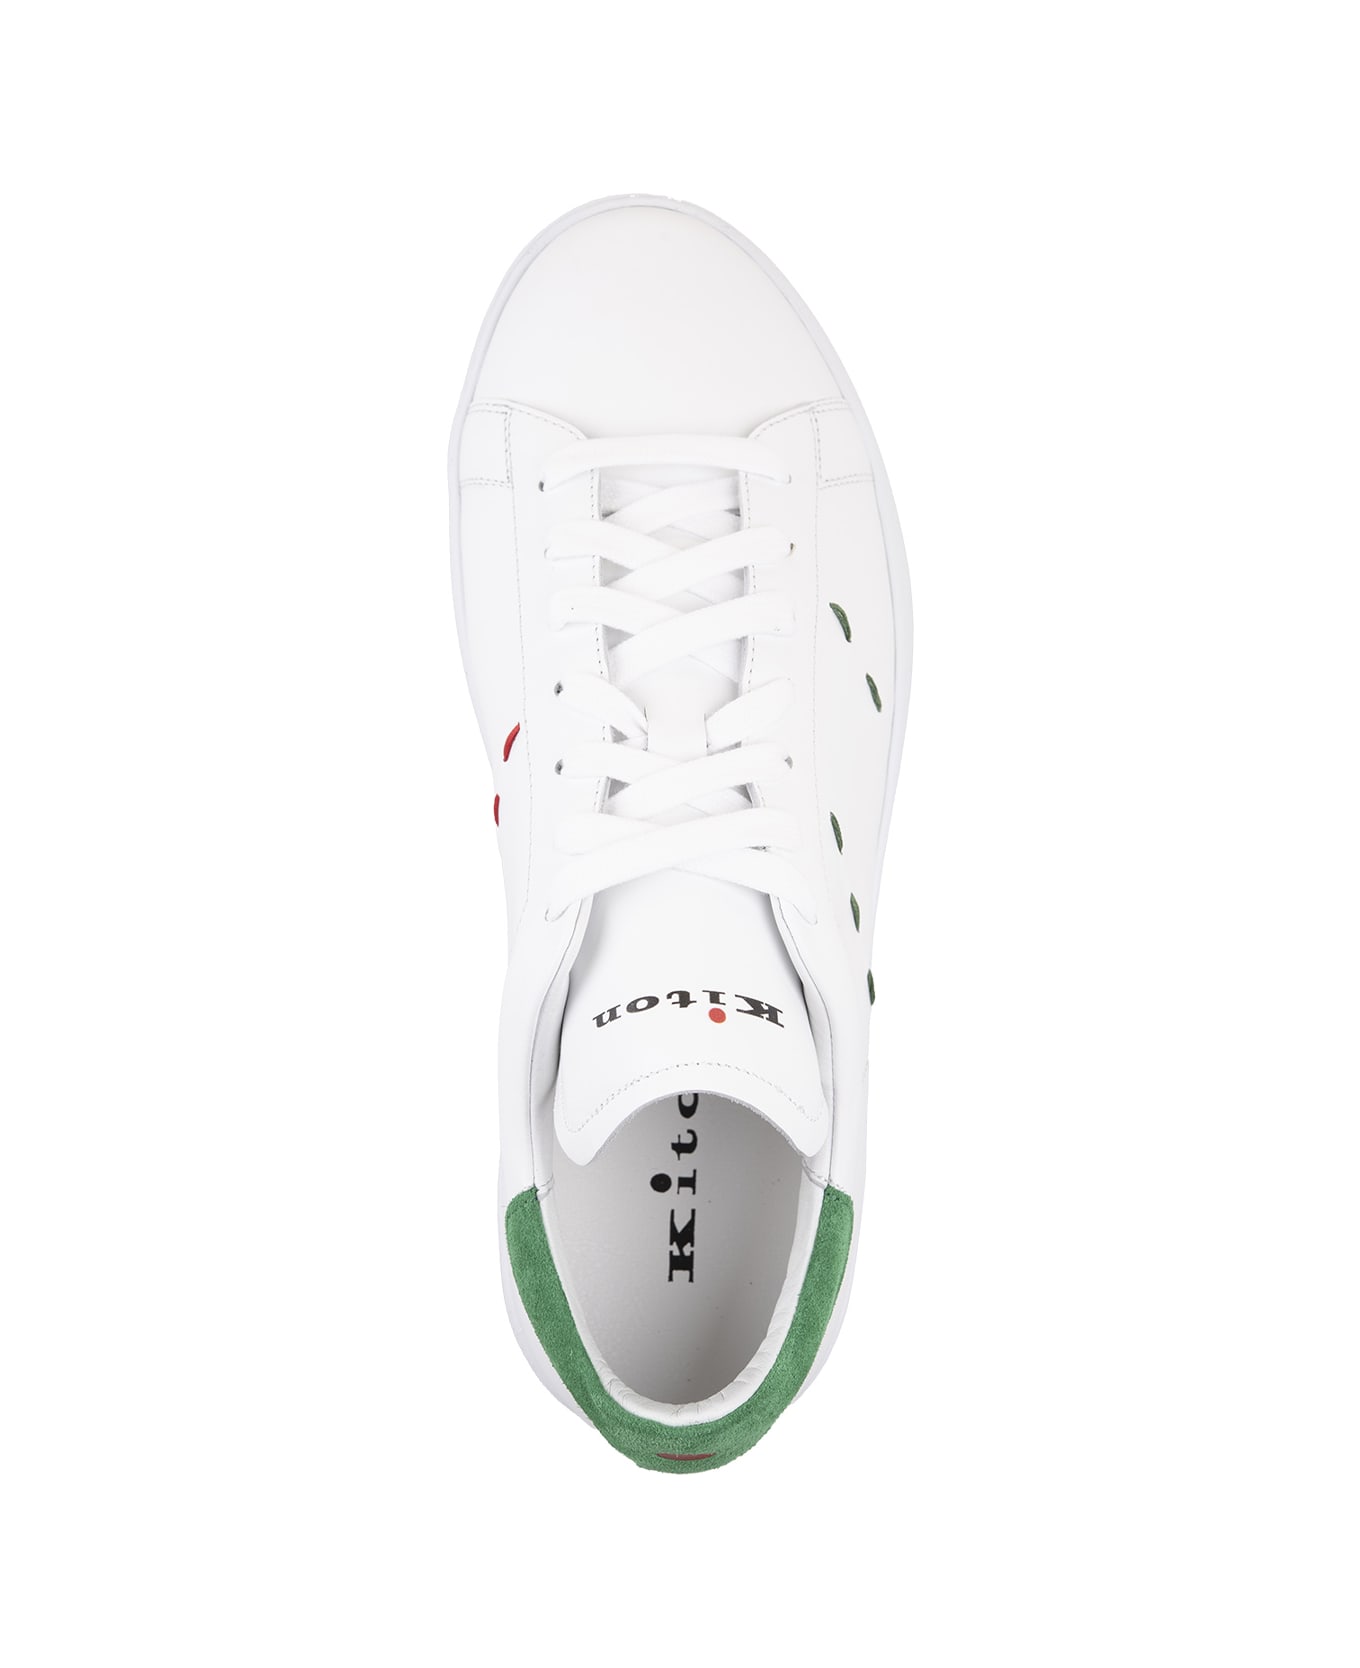 Kiton White Leather Sneakers With Green Details - Green スニーカー